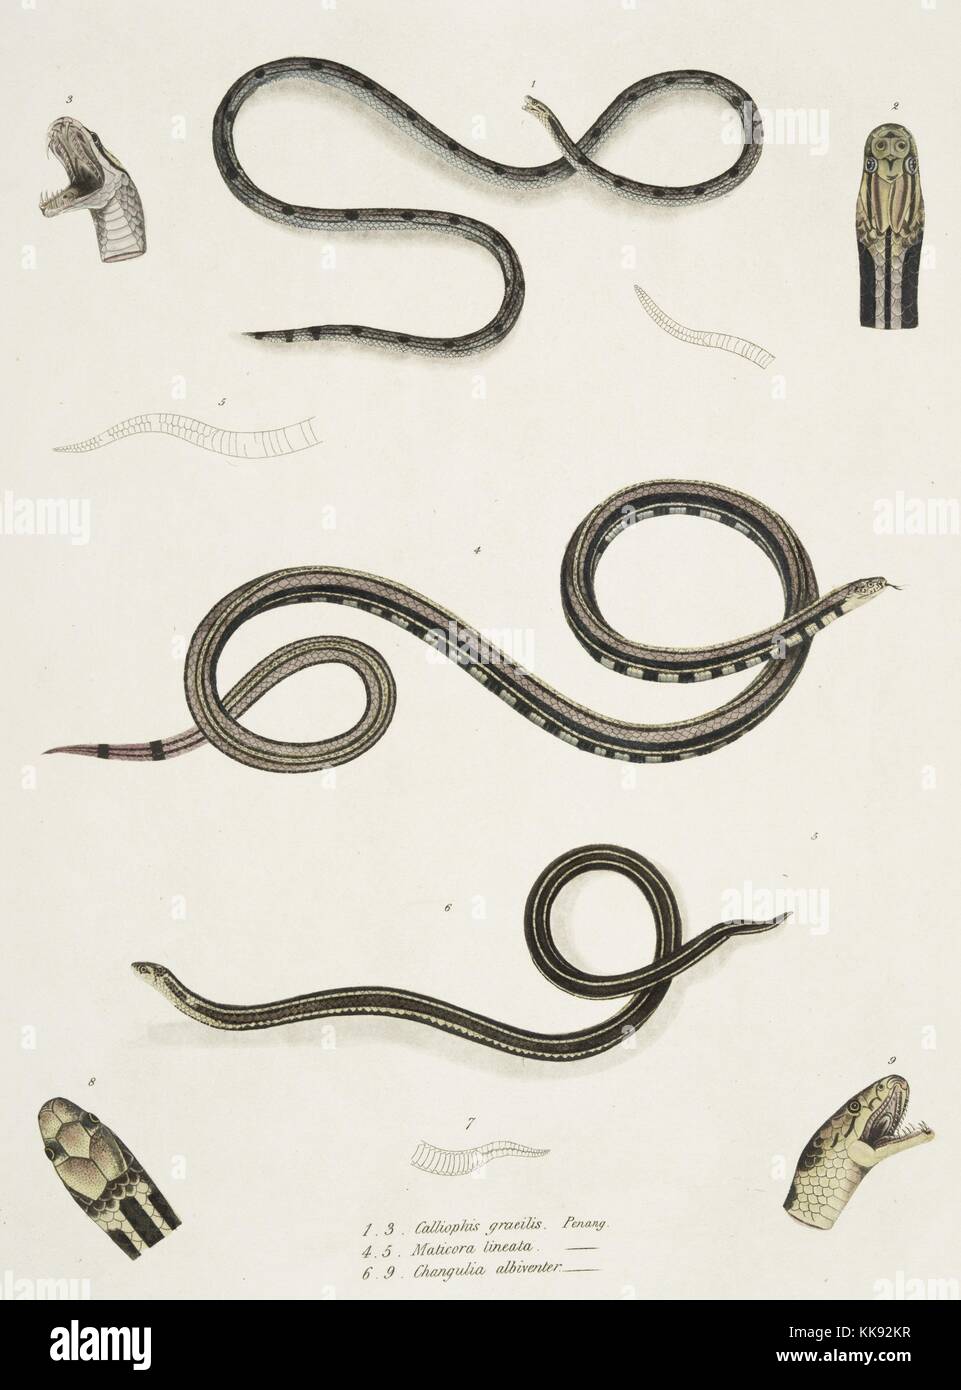 Hand colored print depicting three snakes, at the top a Slender Calliophis (Calliophis gracilis), in the middle a Lined Maticora (Maticora lineata), and at the bottom a White Bellied Changulia (Changulia albiventer), details of their heads and mouths around the corners, from the book 'Illustrations of Indian Zoology, Chiefly from the Collection of Major General Hardwicke', 1832. From the New York Public Library. Stock Photo